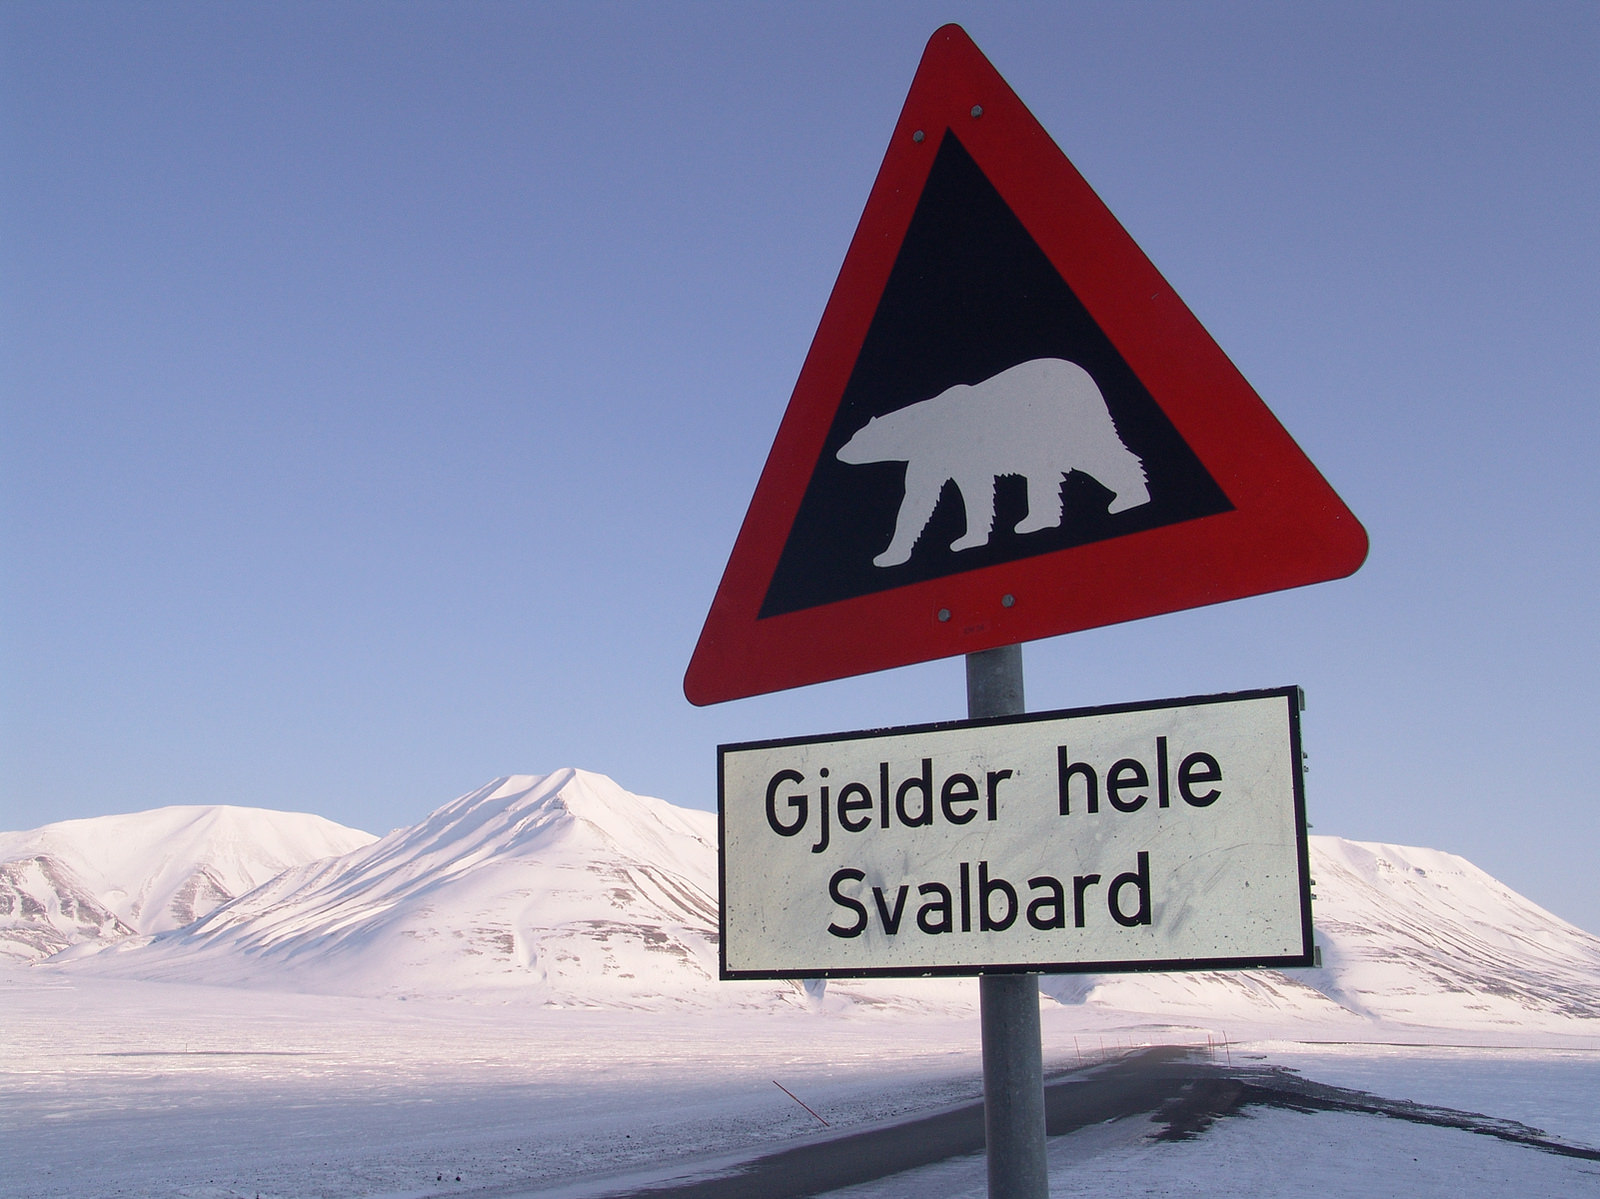 Without support for diverse varieties of food crops - like that in Svalbard - the future of the world’s global food supply could be at risk